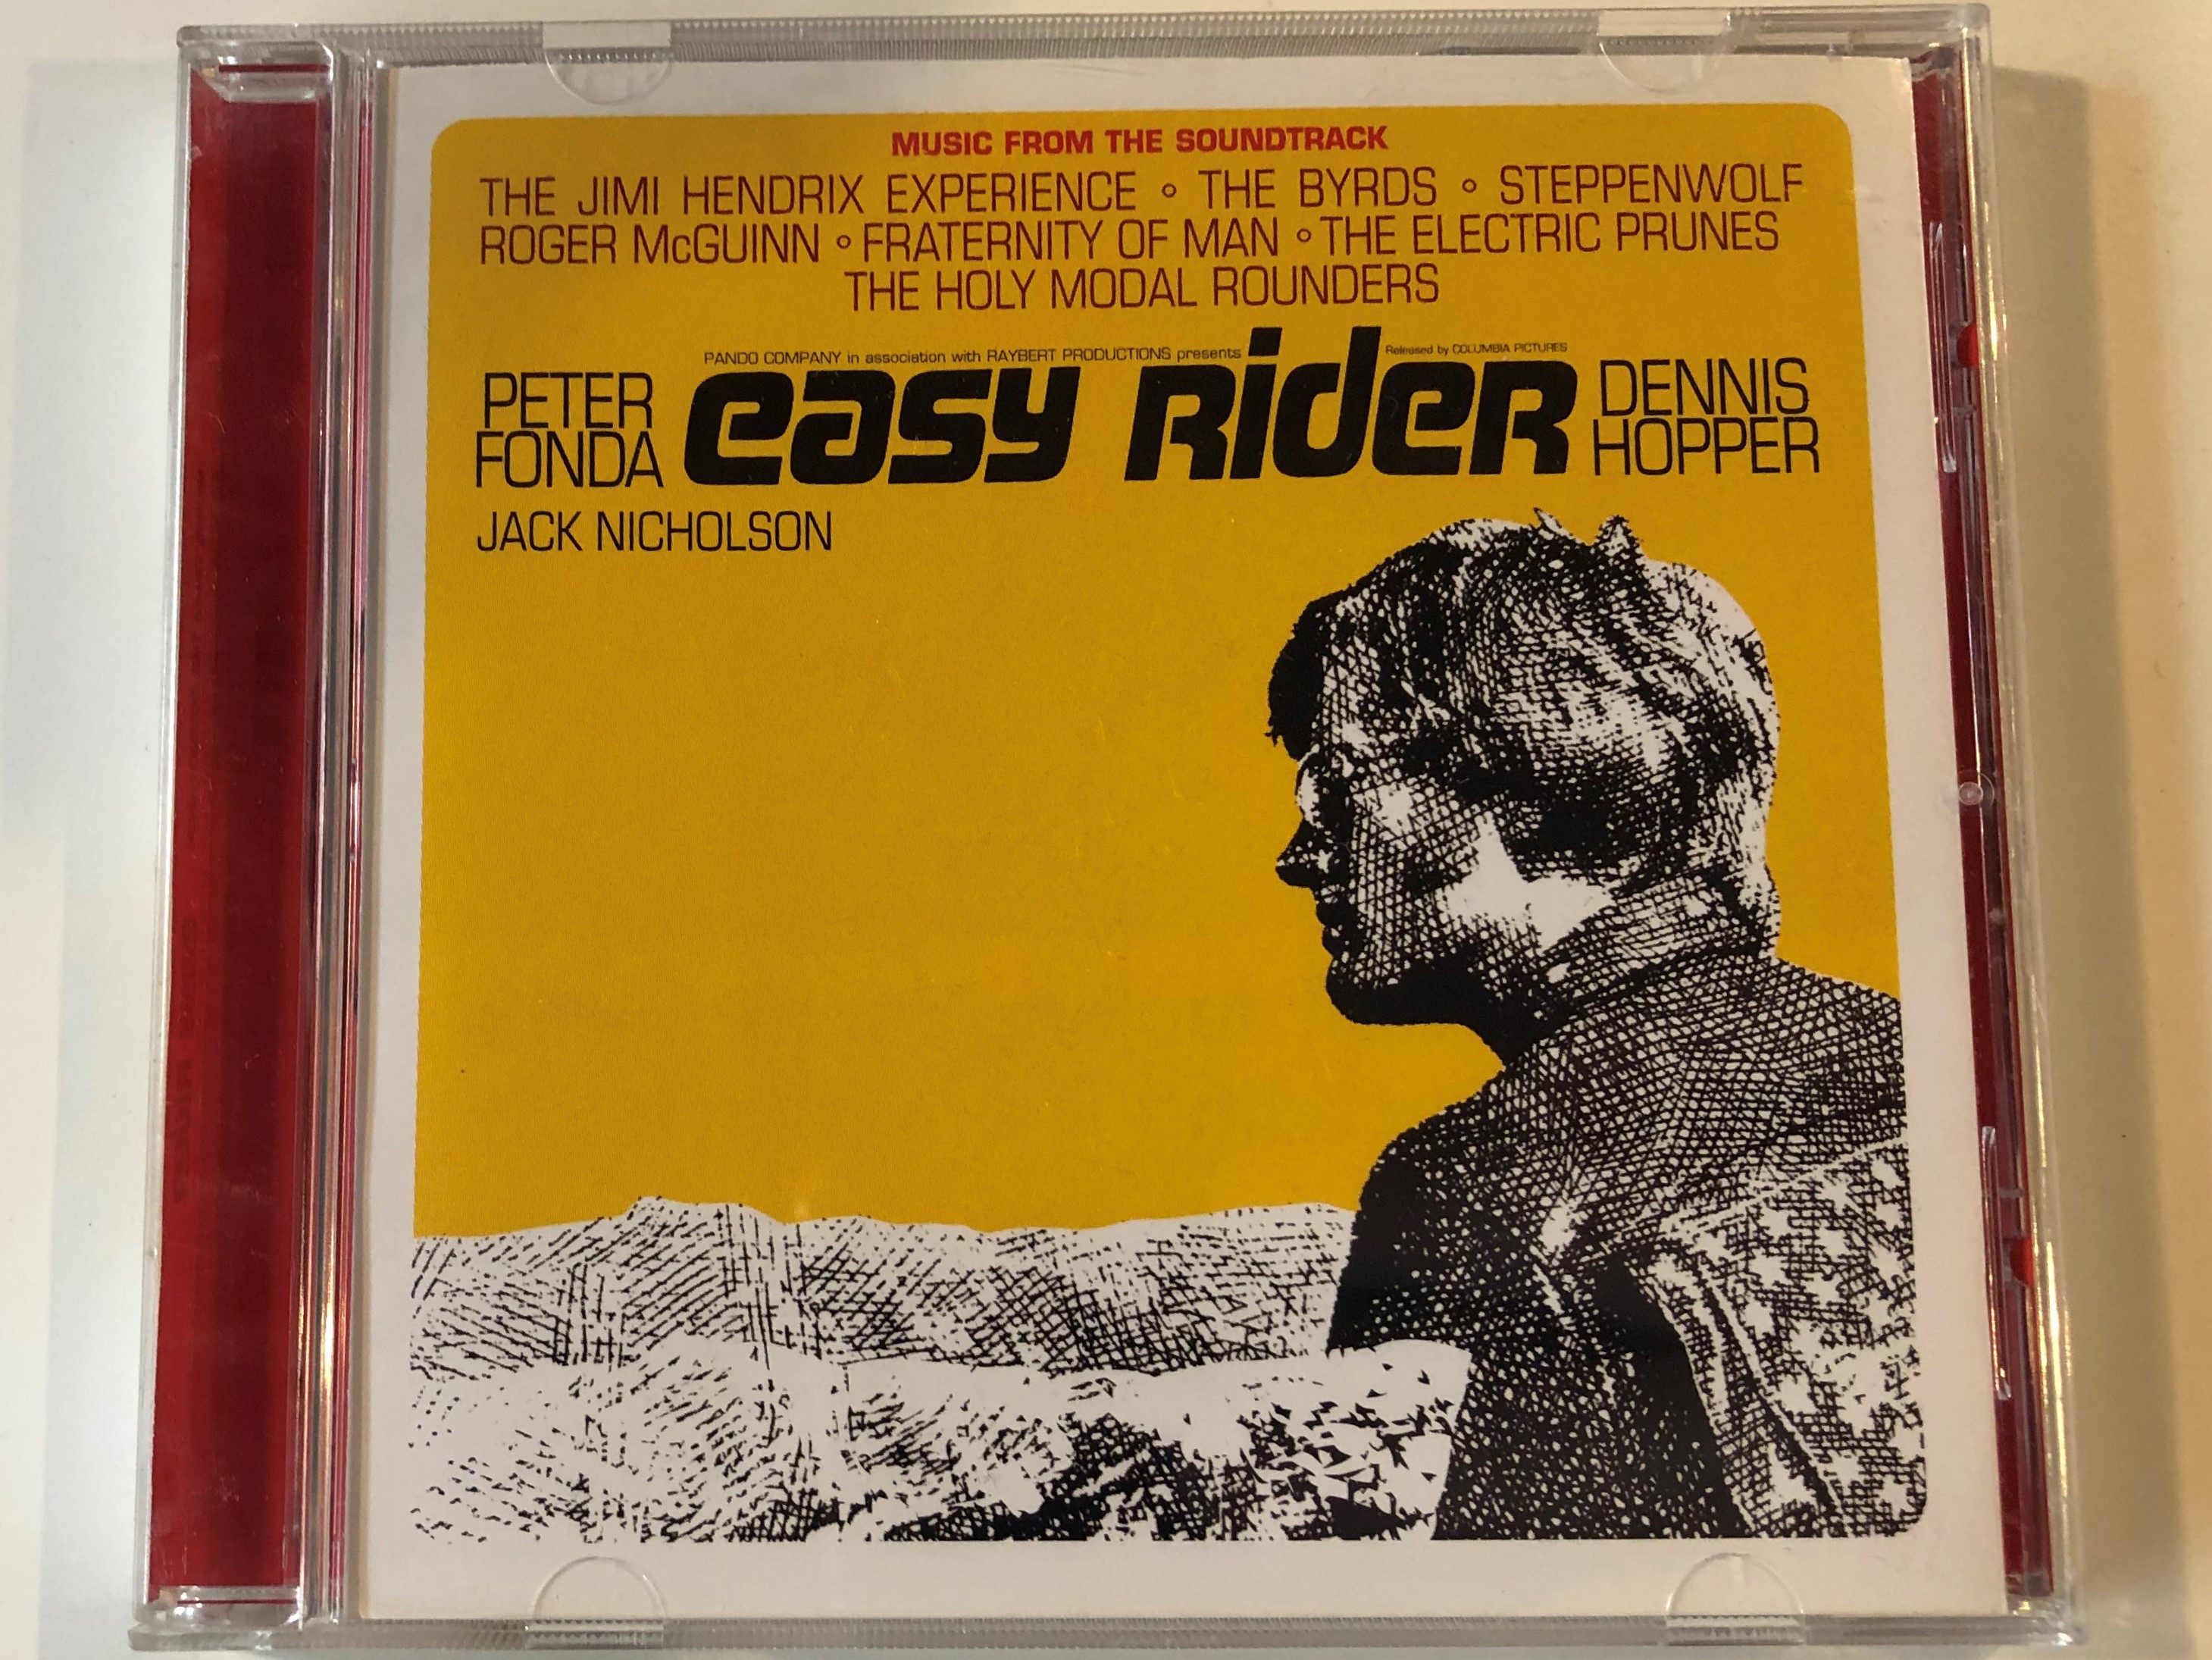 easy-rider-music-from-the-soundtrack-the-jimi-hendrix-experience-the-byrds-steppenwolf-roger-mcguinn-fraternity-of-man-electric-prunes-peter-fonda-dennis-hopper-jack-nicholson-mca-re-1-.jpg